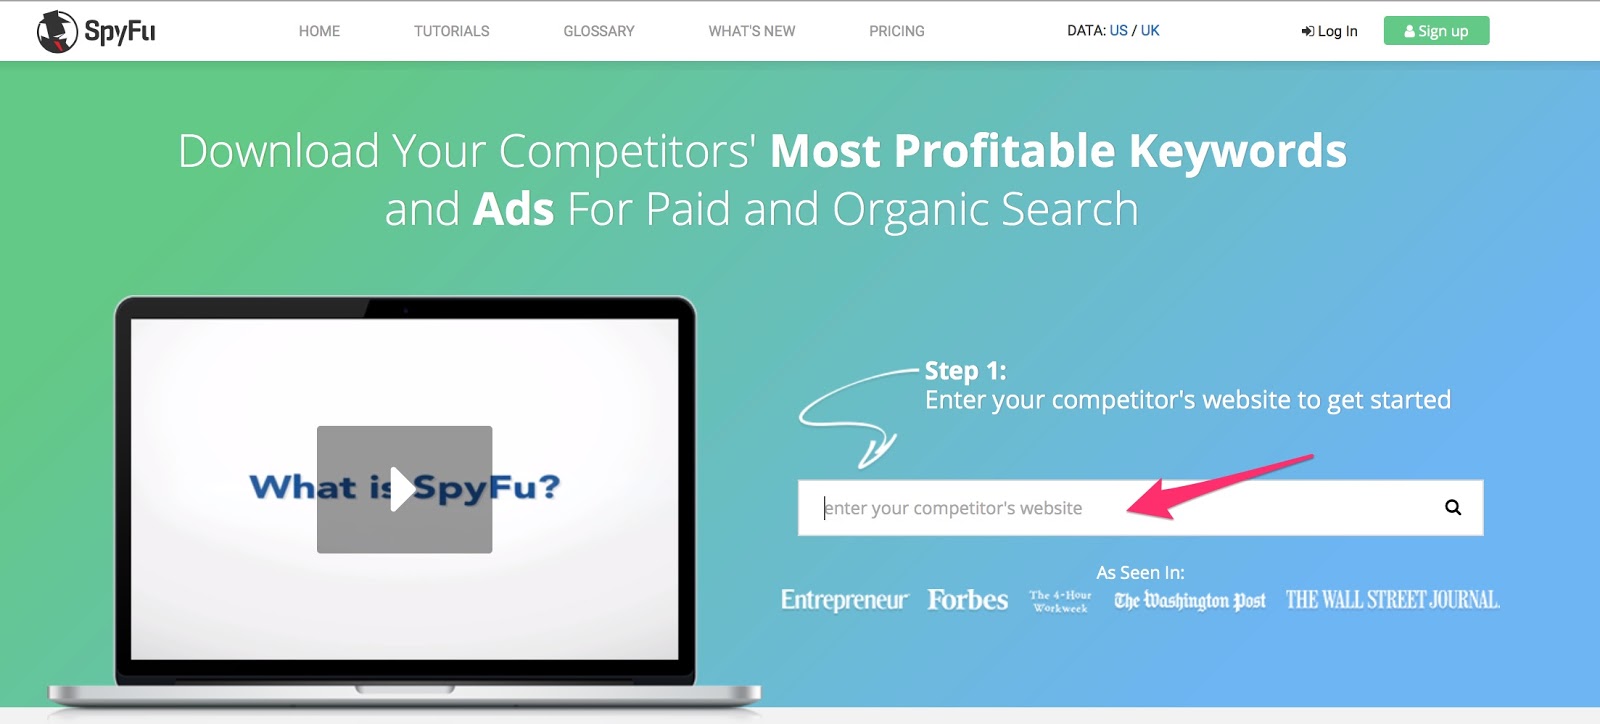 SpyFu - Competitors Keyword Research Tool for SEO and Adwords PPC